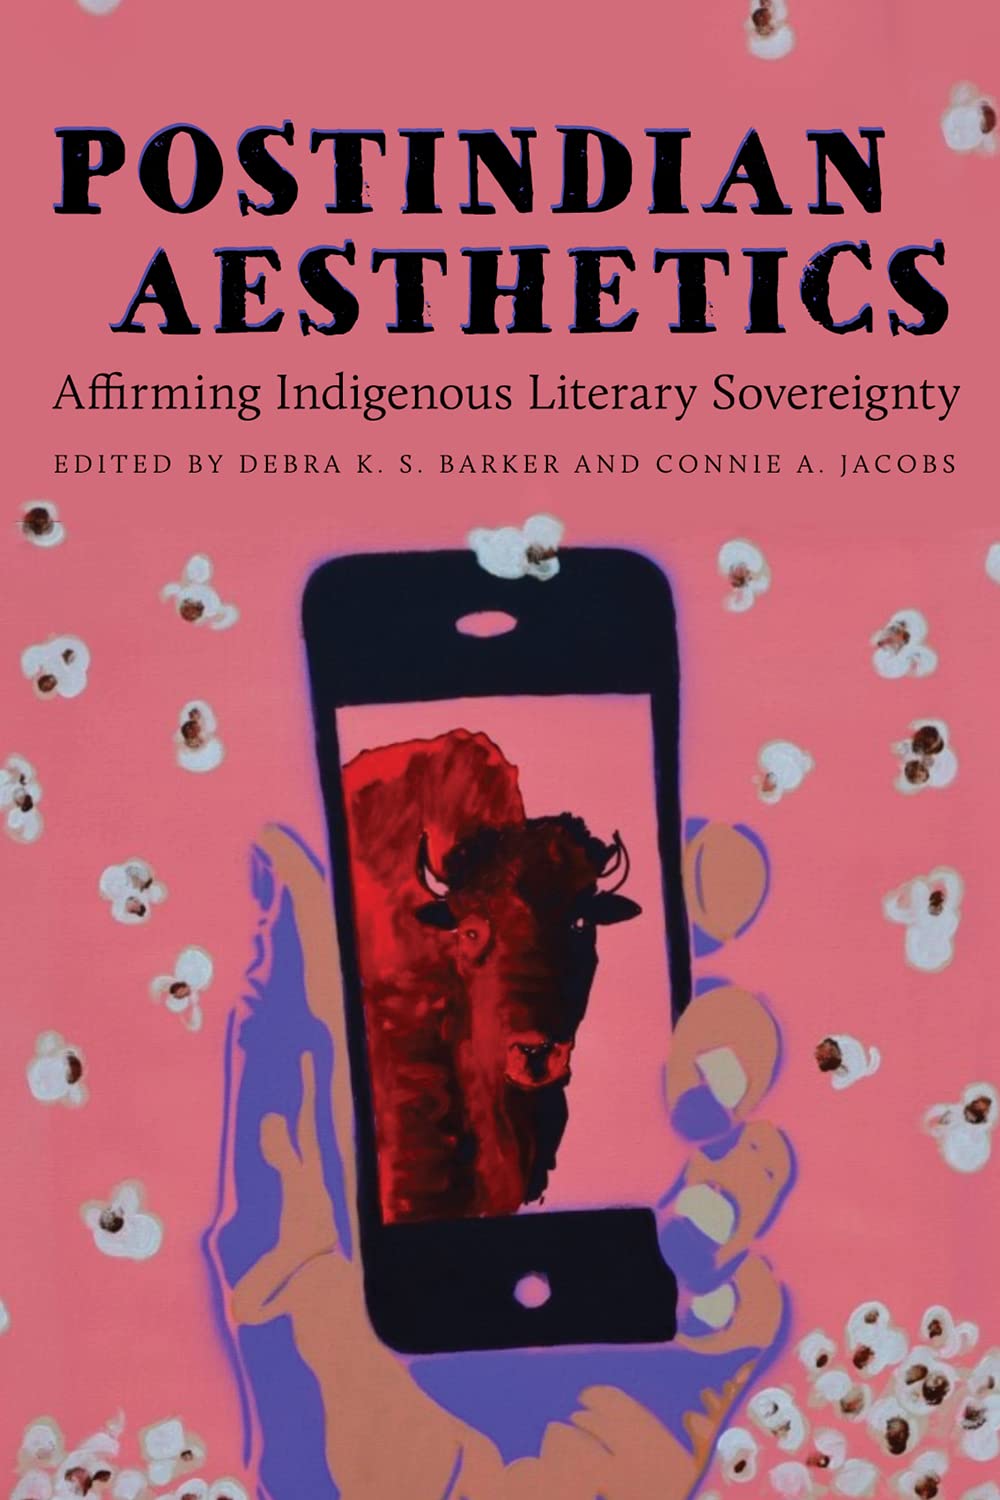 Postindian Aesthetics: Affirming Indigenous Literary Sovereignty edited by Debra K. S. Barker & Connie A. Jacobs